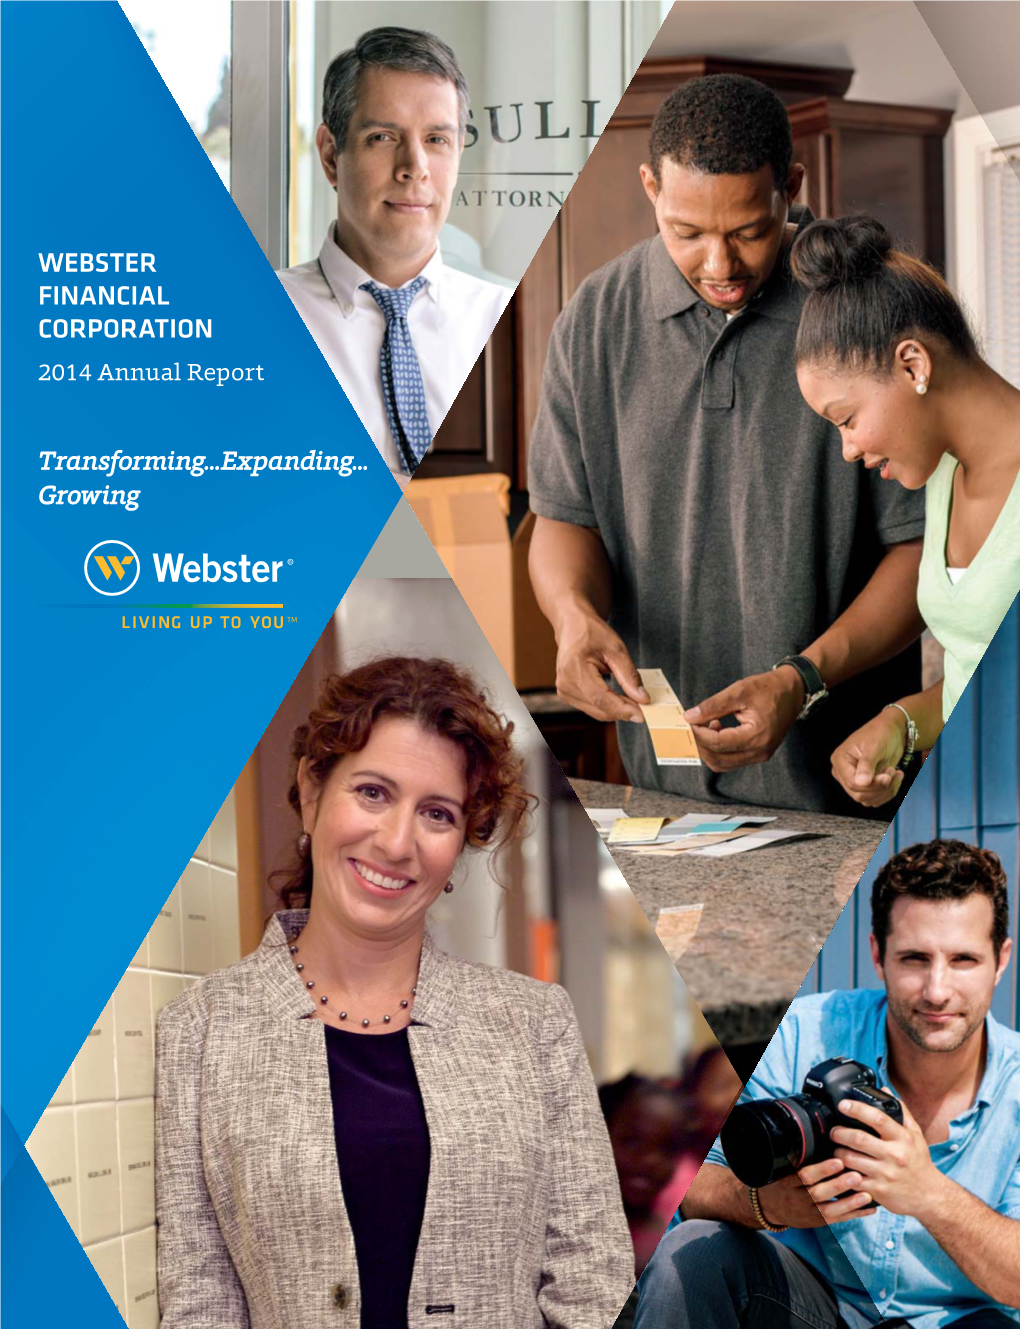 WEBSTER FINANCIAL CORPORATION 2014 Annual Report